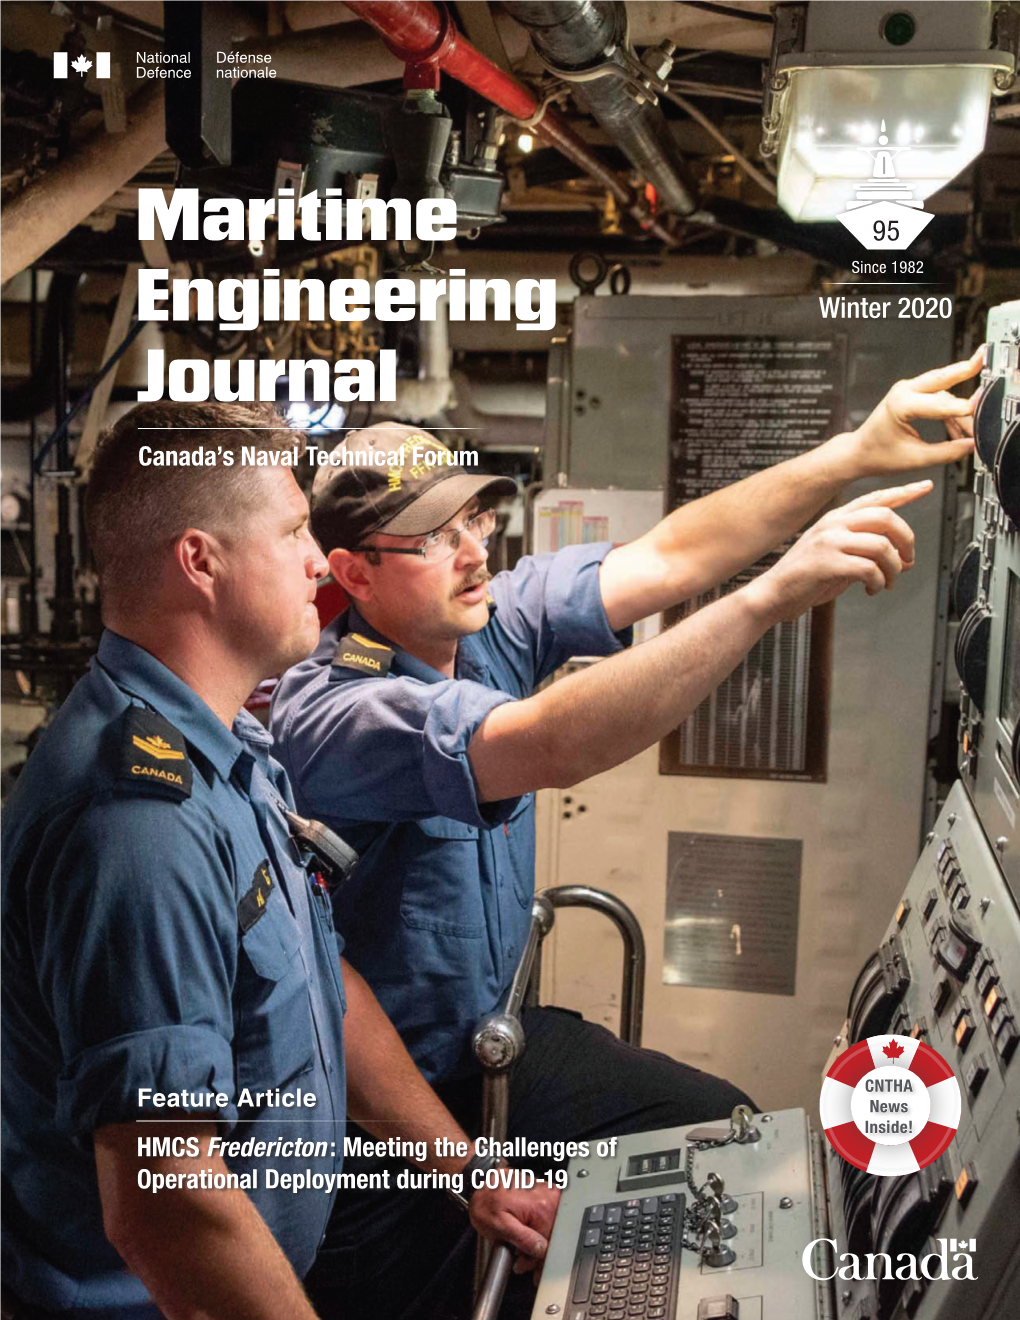 Maritime Engineering Journal During Operation Reassurance on May 30, 2020